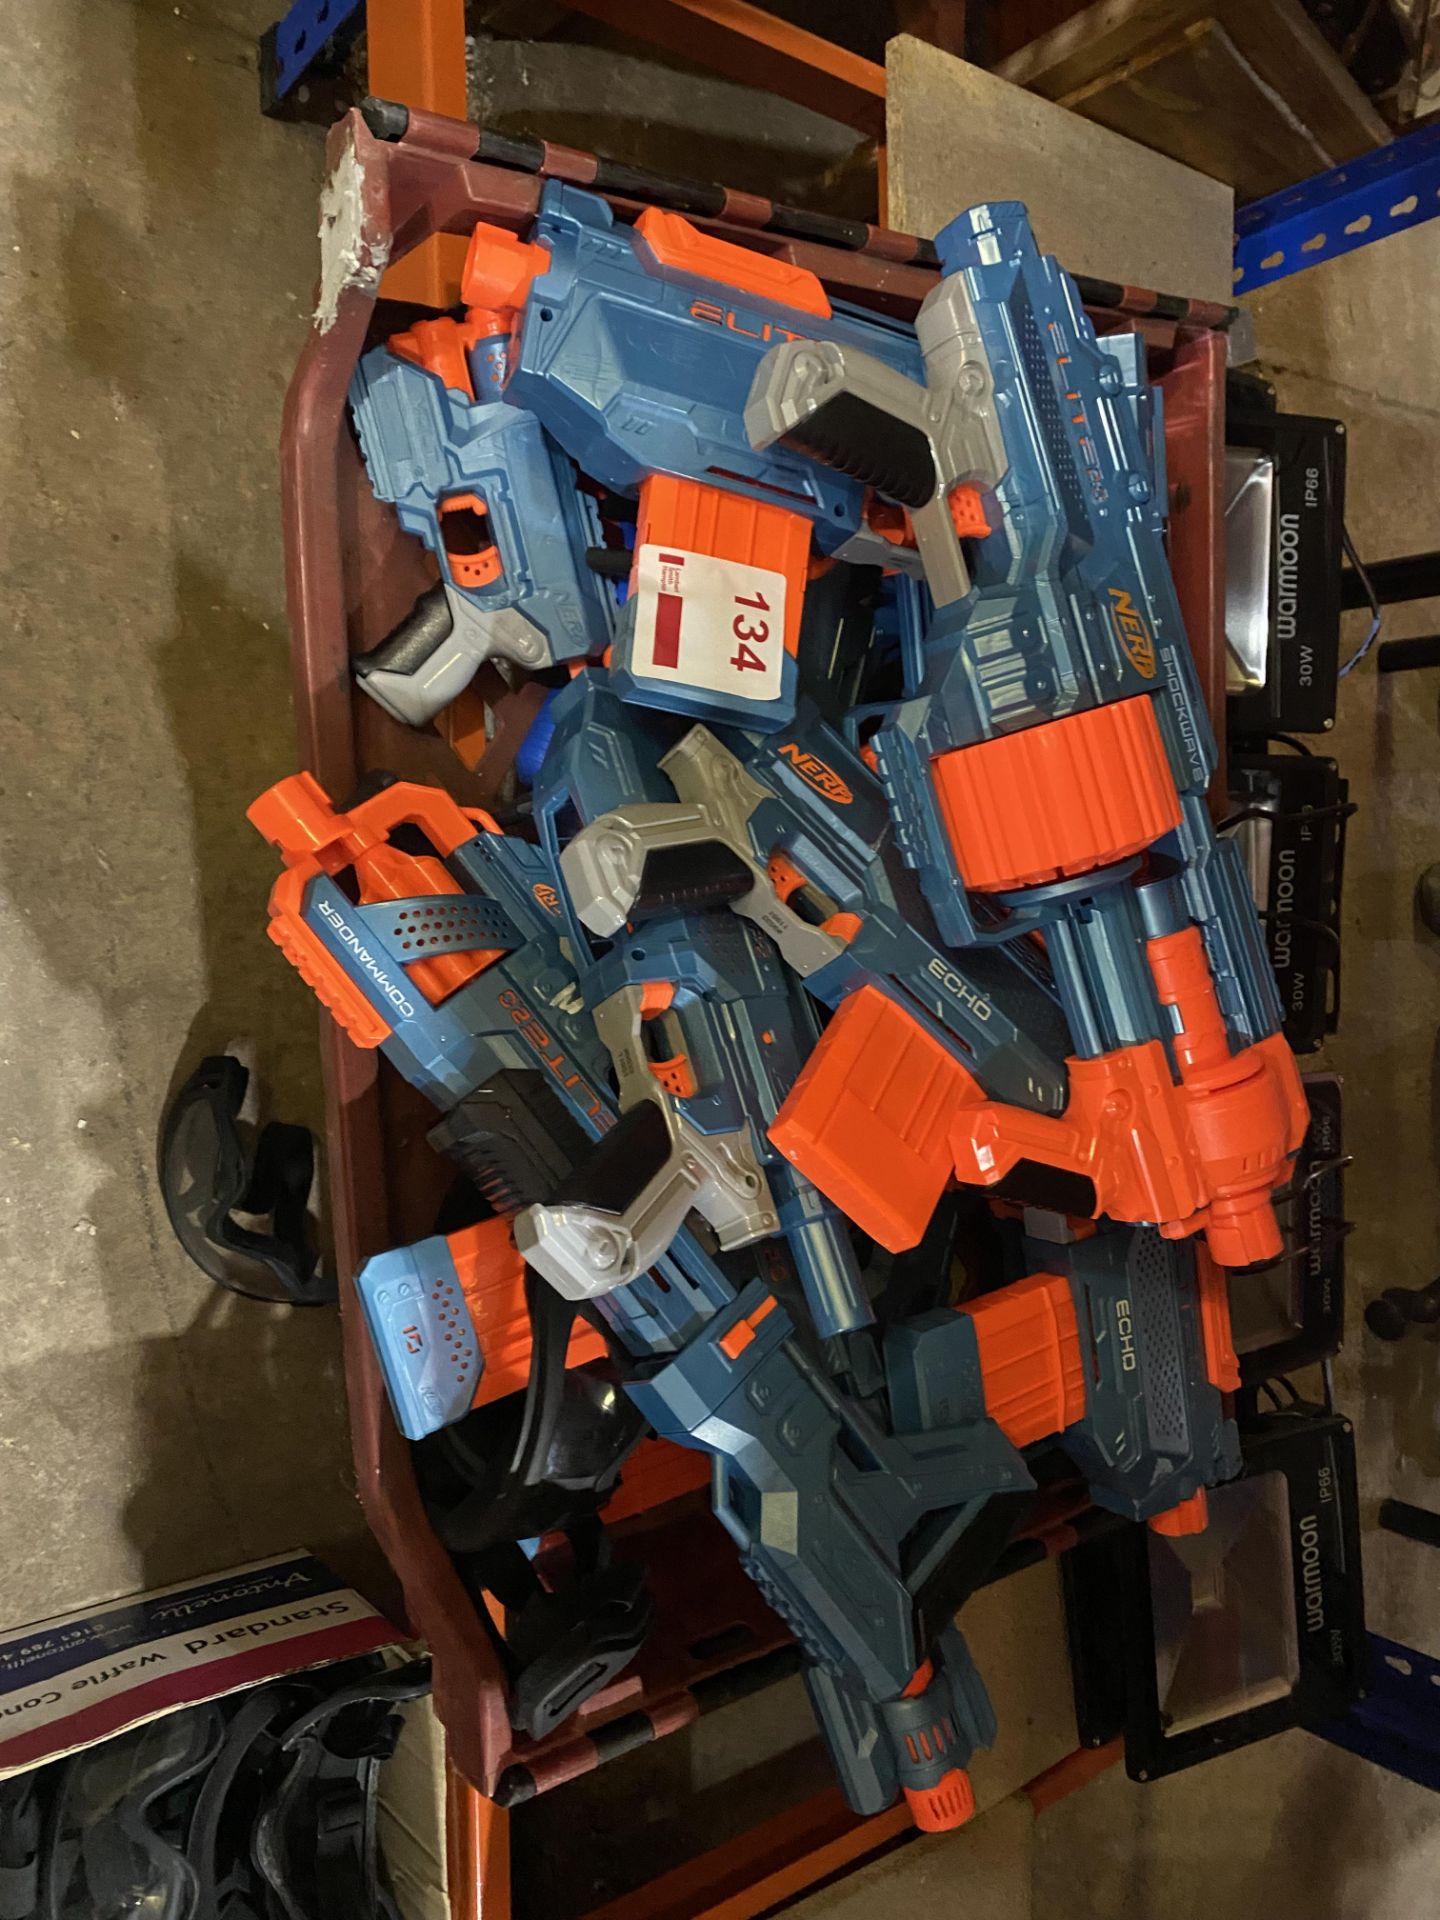 Crate of assorted Nerf guns and goggles